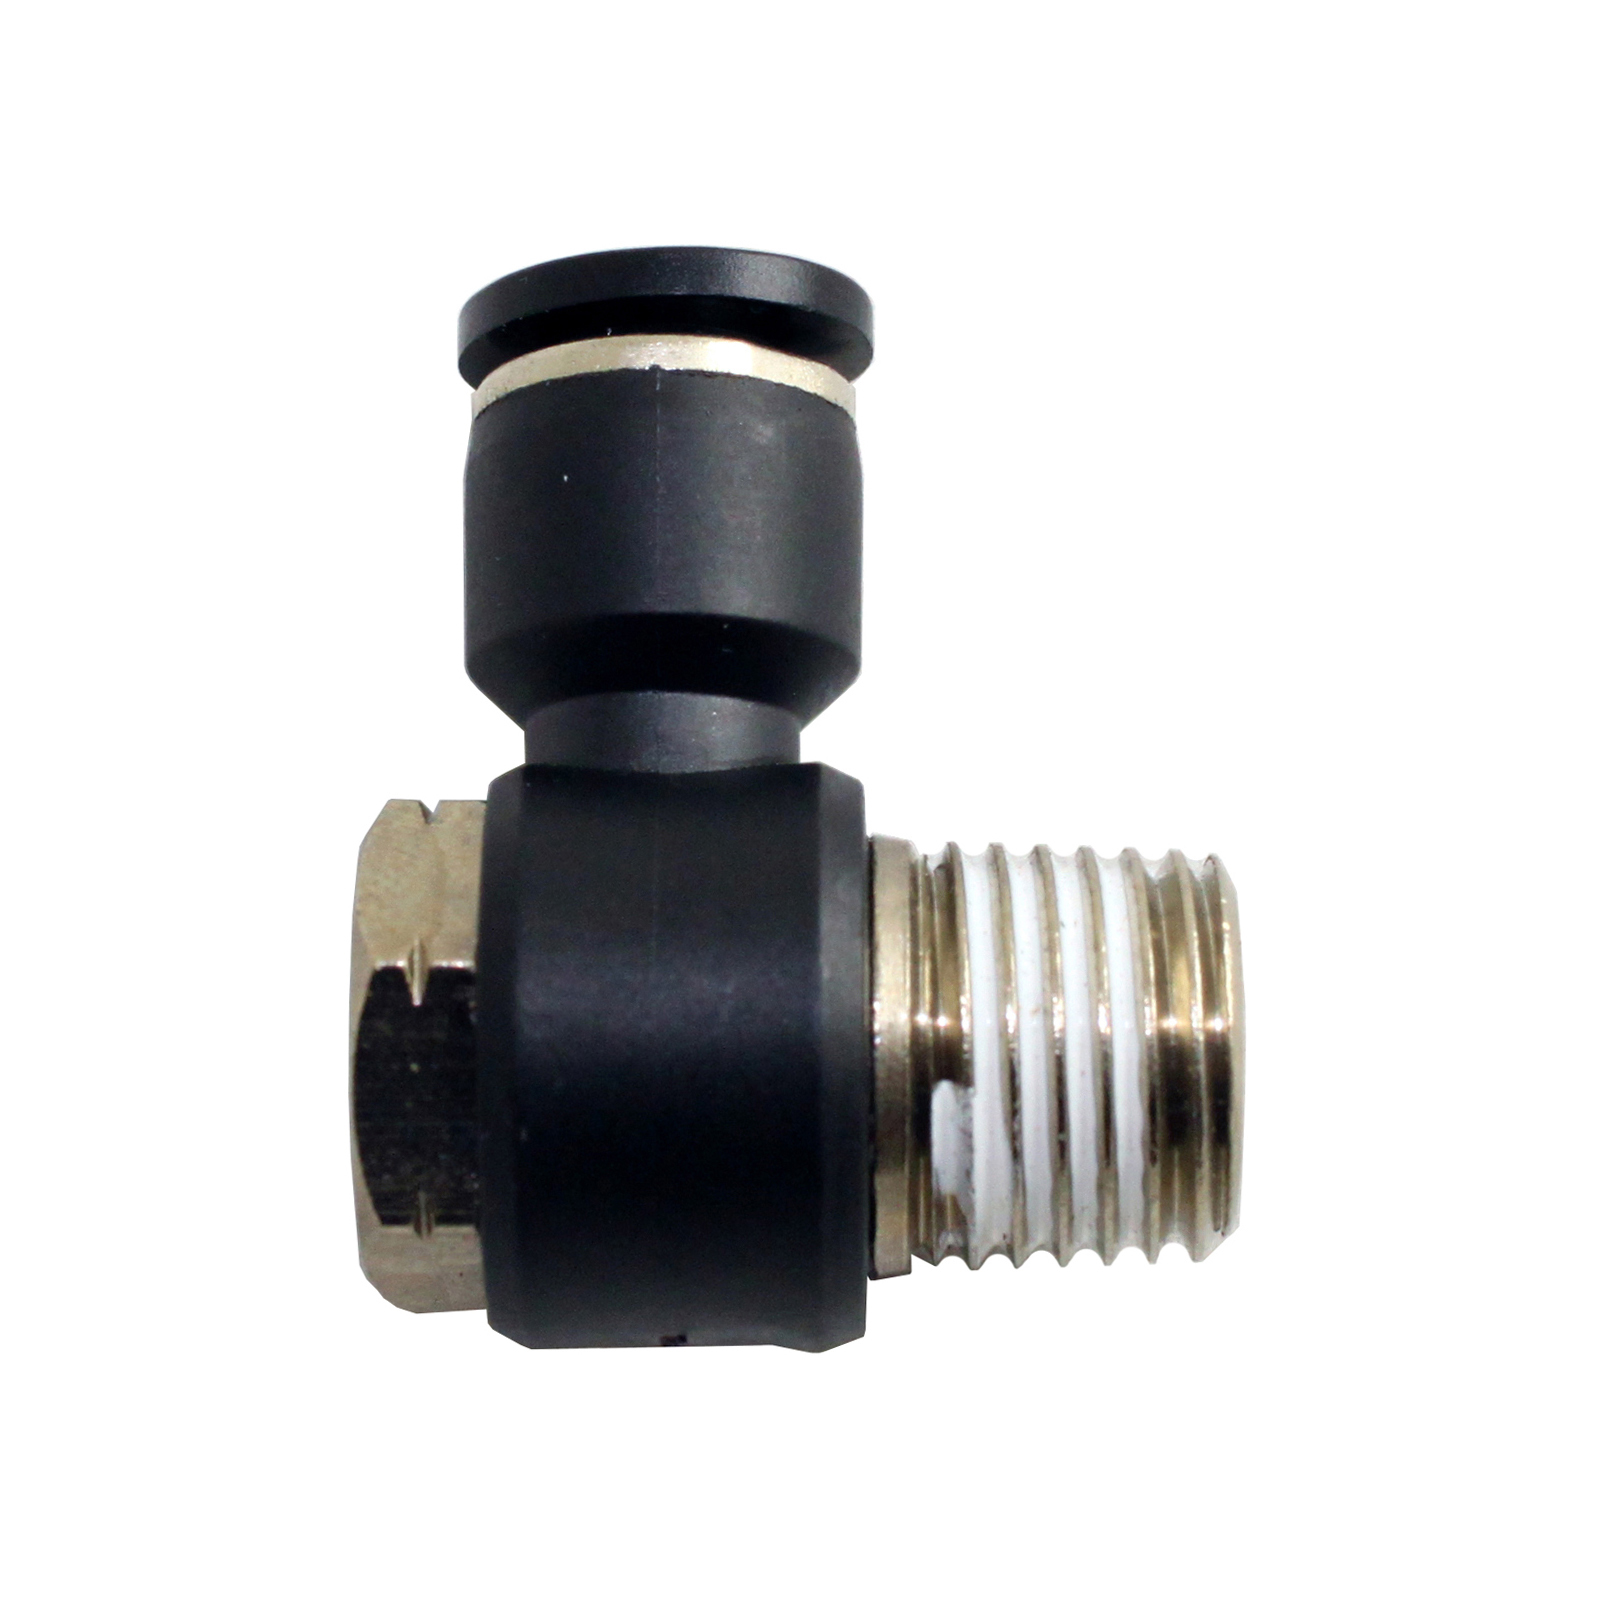 CEKER Brass 3/8 Tube Od 3 Way Union Tee Air Fittings Push to Connect Tube Fitting Quick Pneumatic Connector Push Lock Fittings 1Pack 